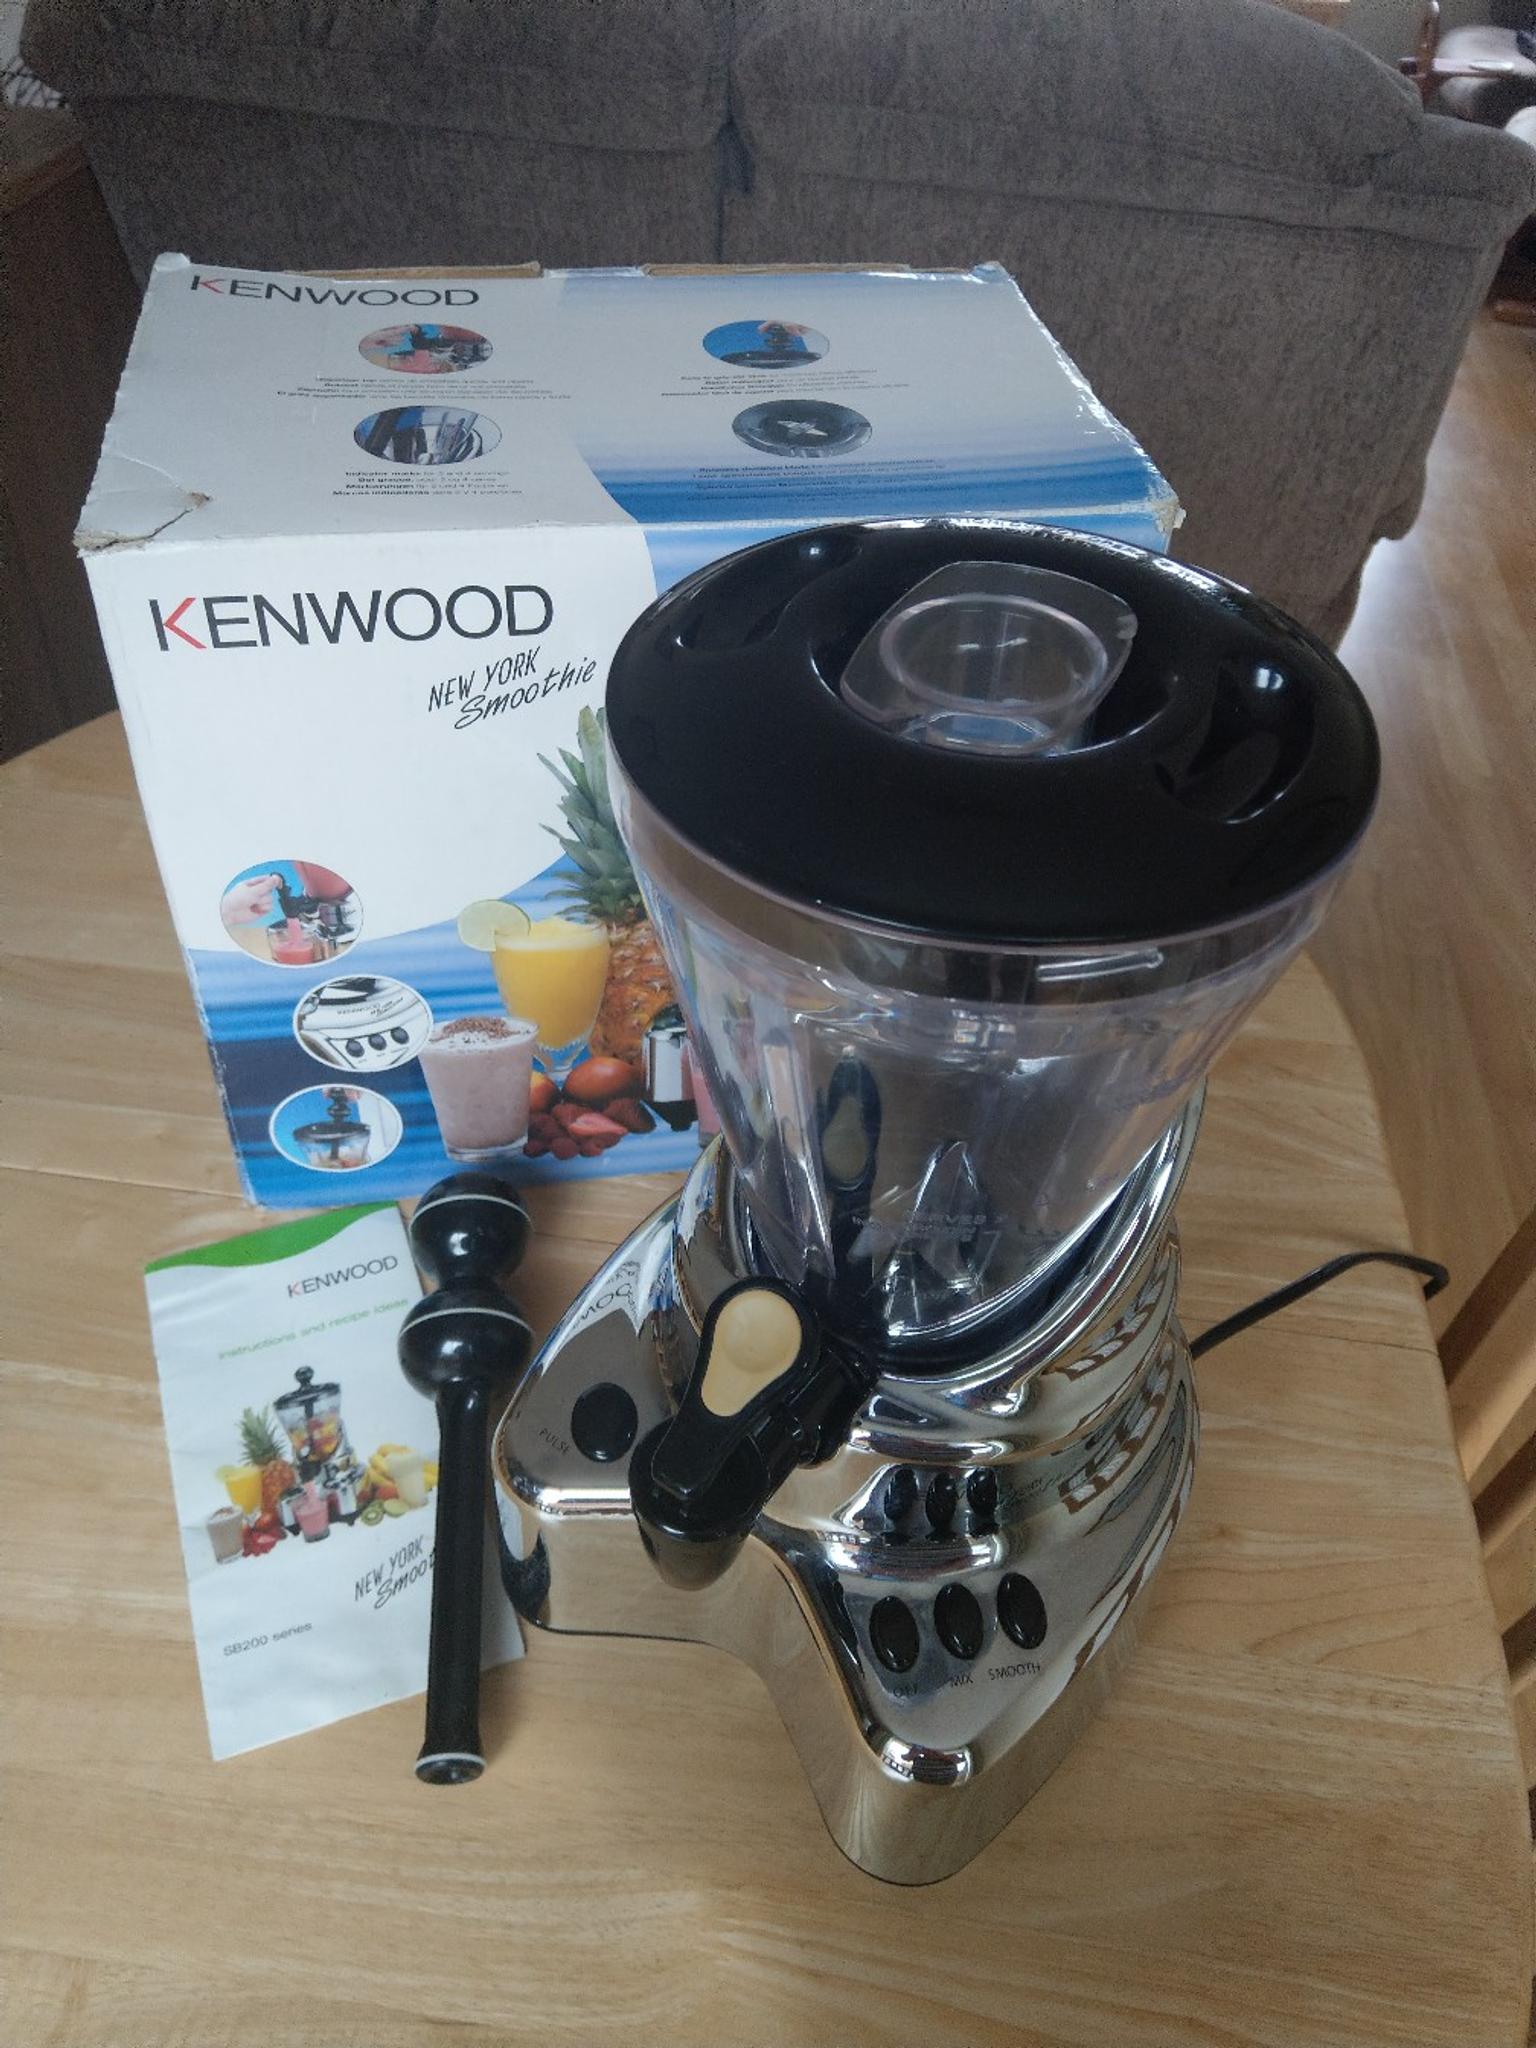 bridge Australian person I read a book Kenwood New York Smoothie Maker in B79 Tamworth for £5.00 for sale | Shpock